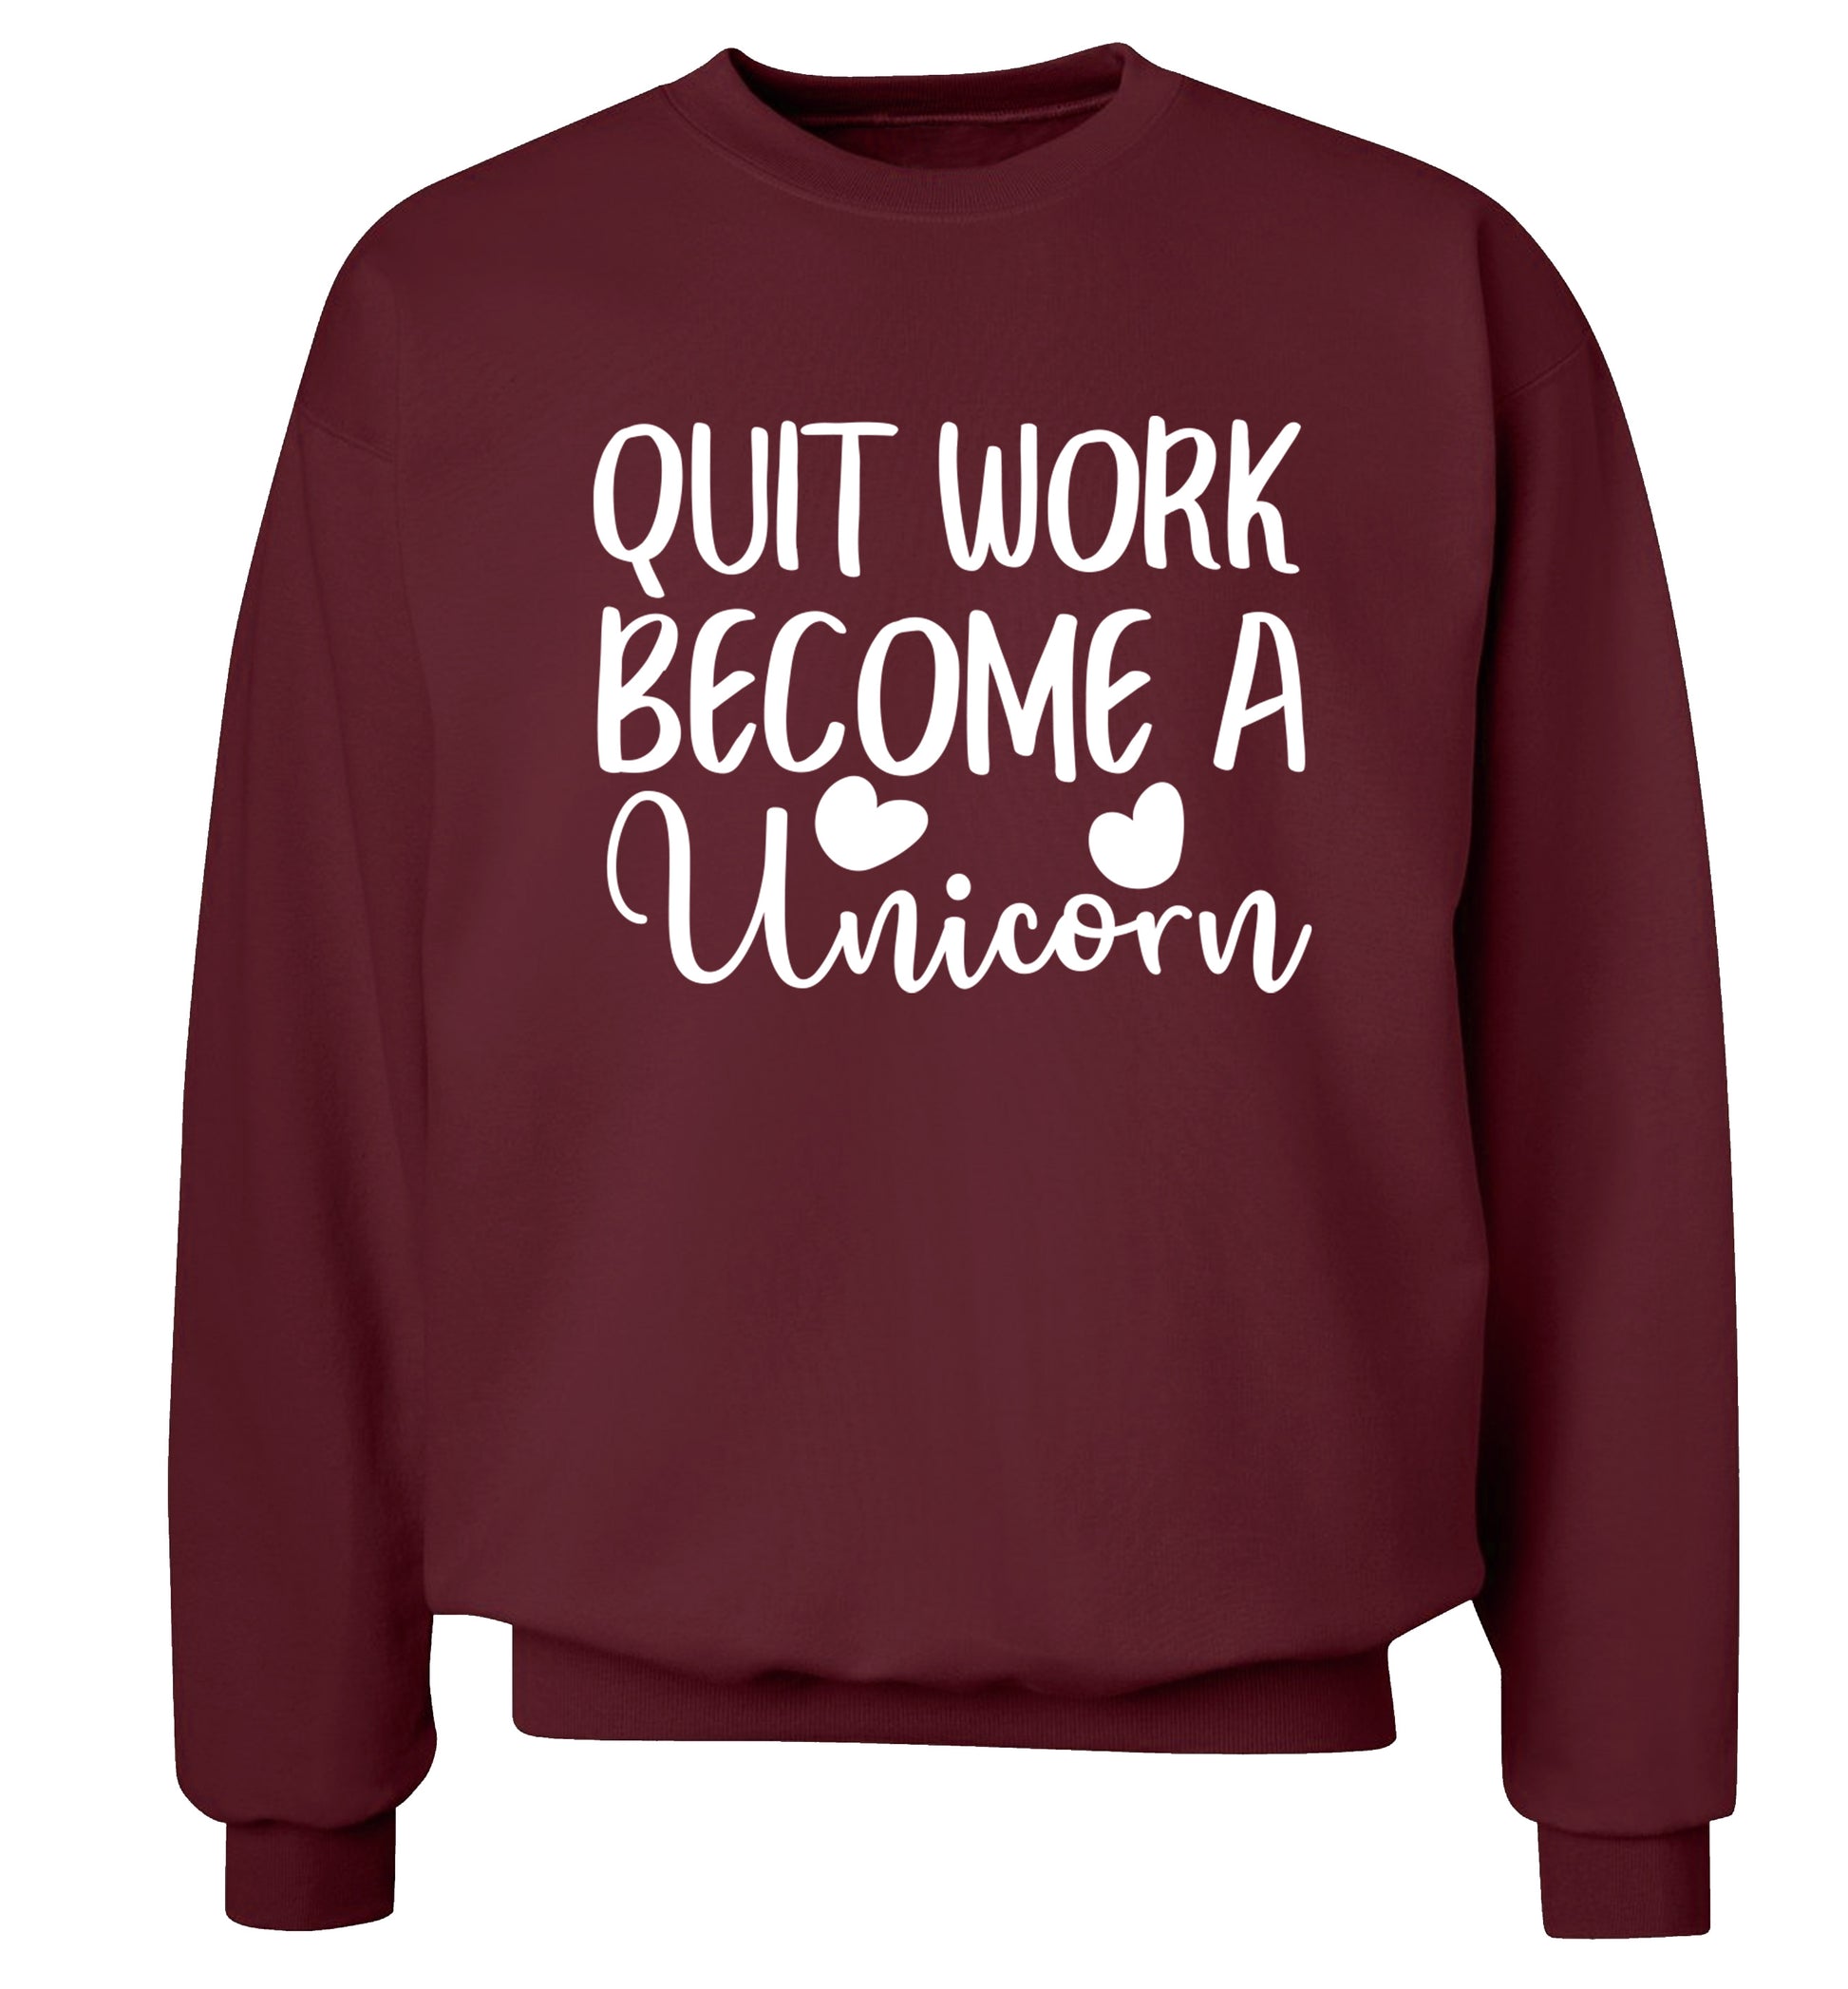 Quit work become a unicorn Adult's unisex maroon Sweater 2XL